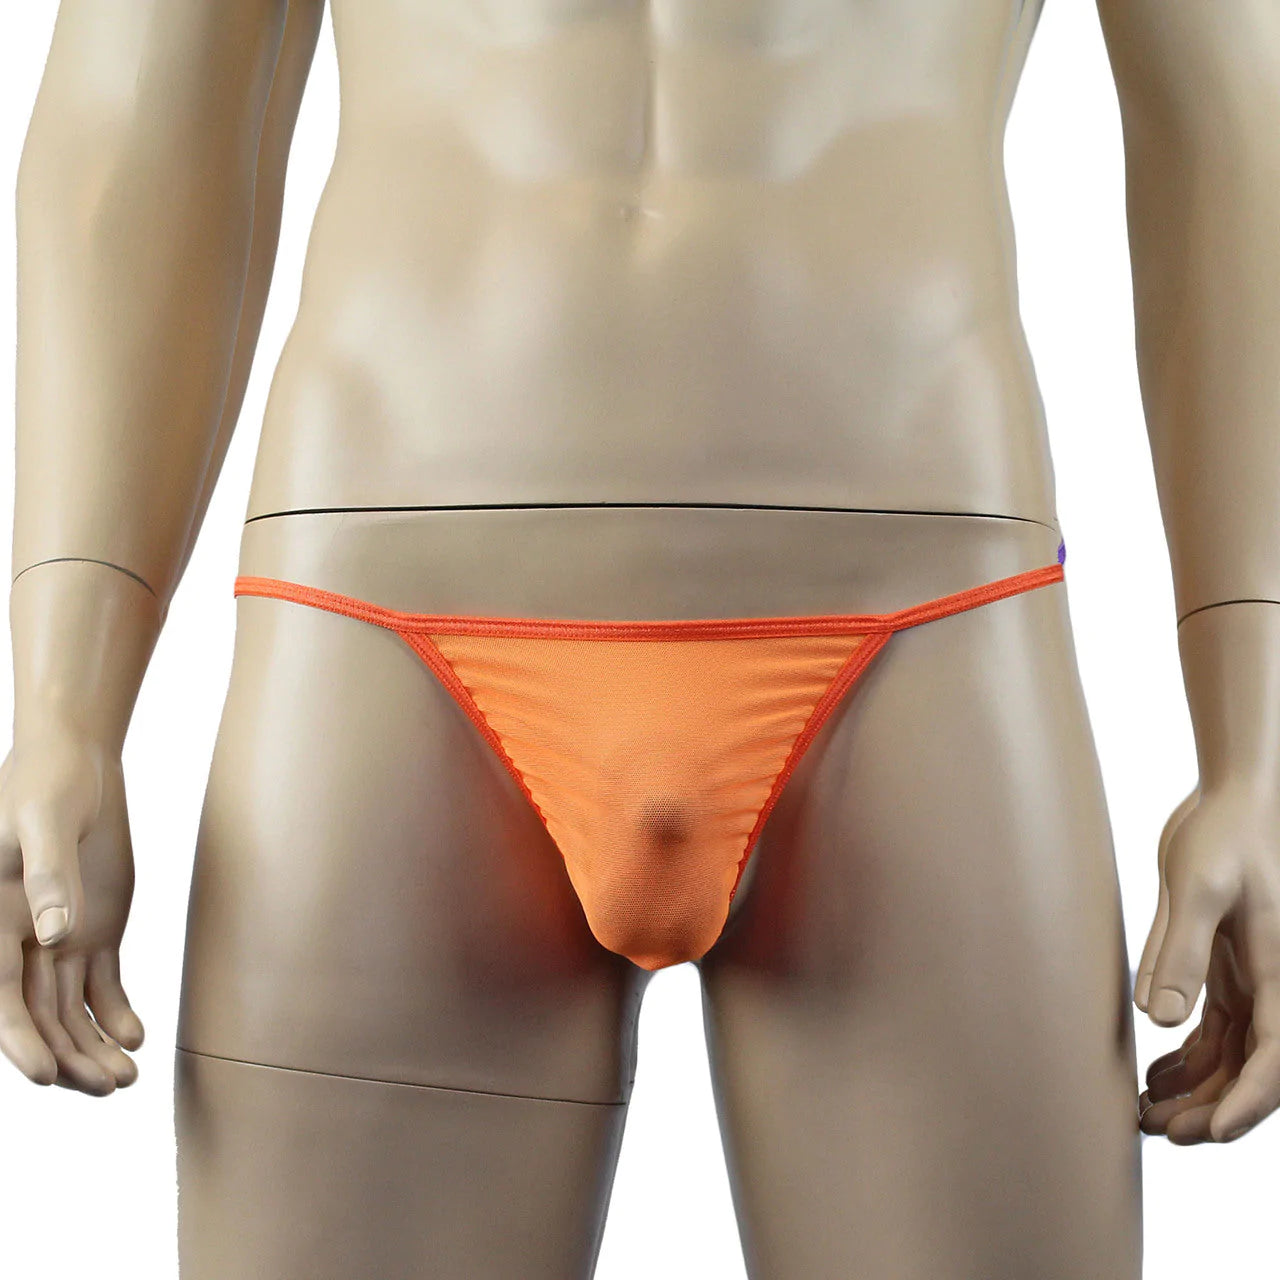 SALE - Mens Vicky See Through Sheer Mesh Pouch G string Orange